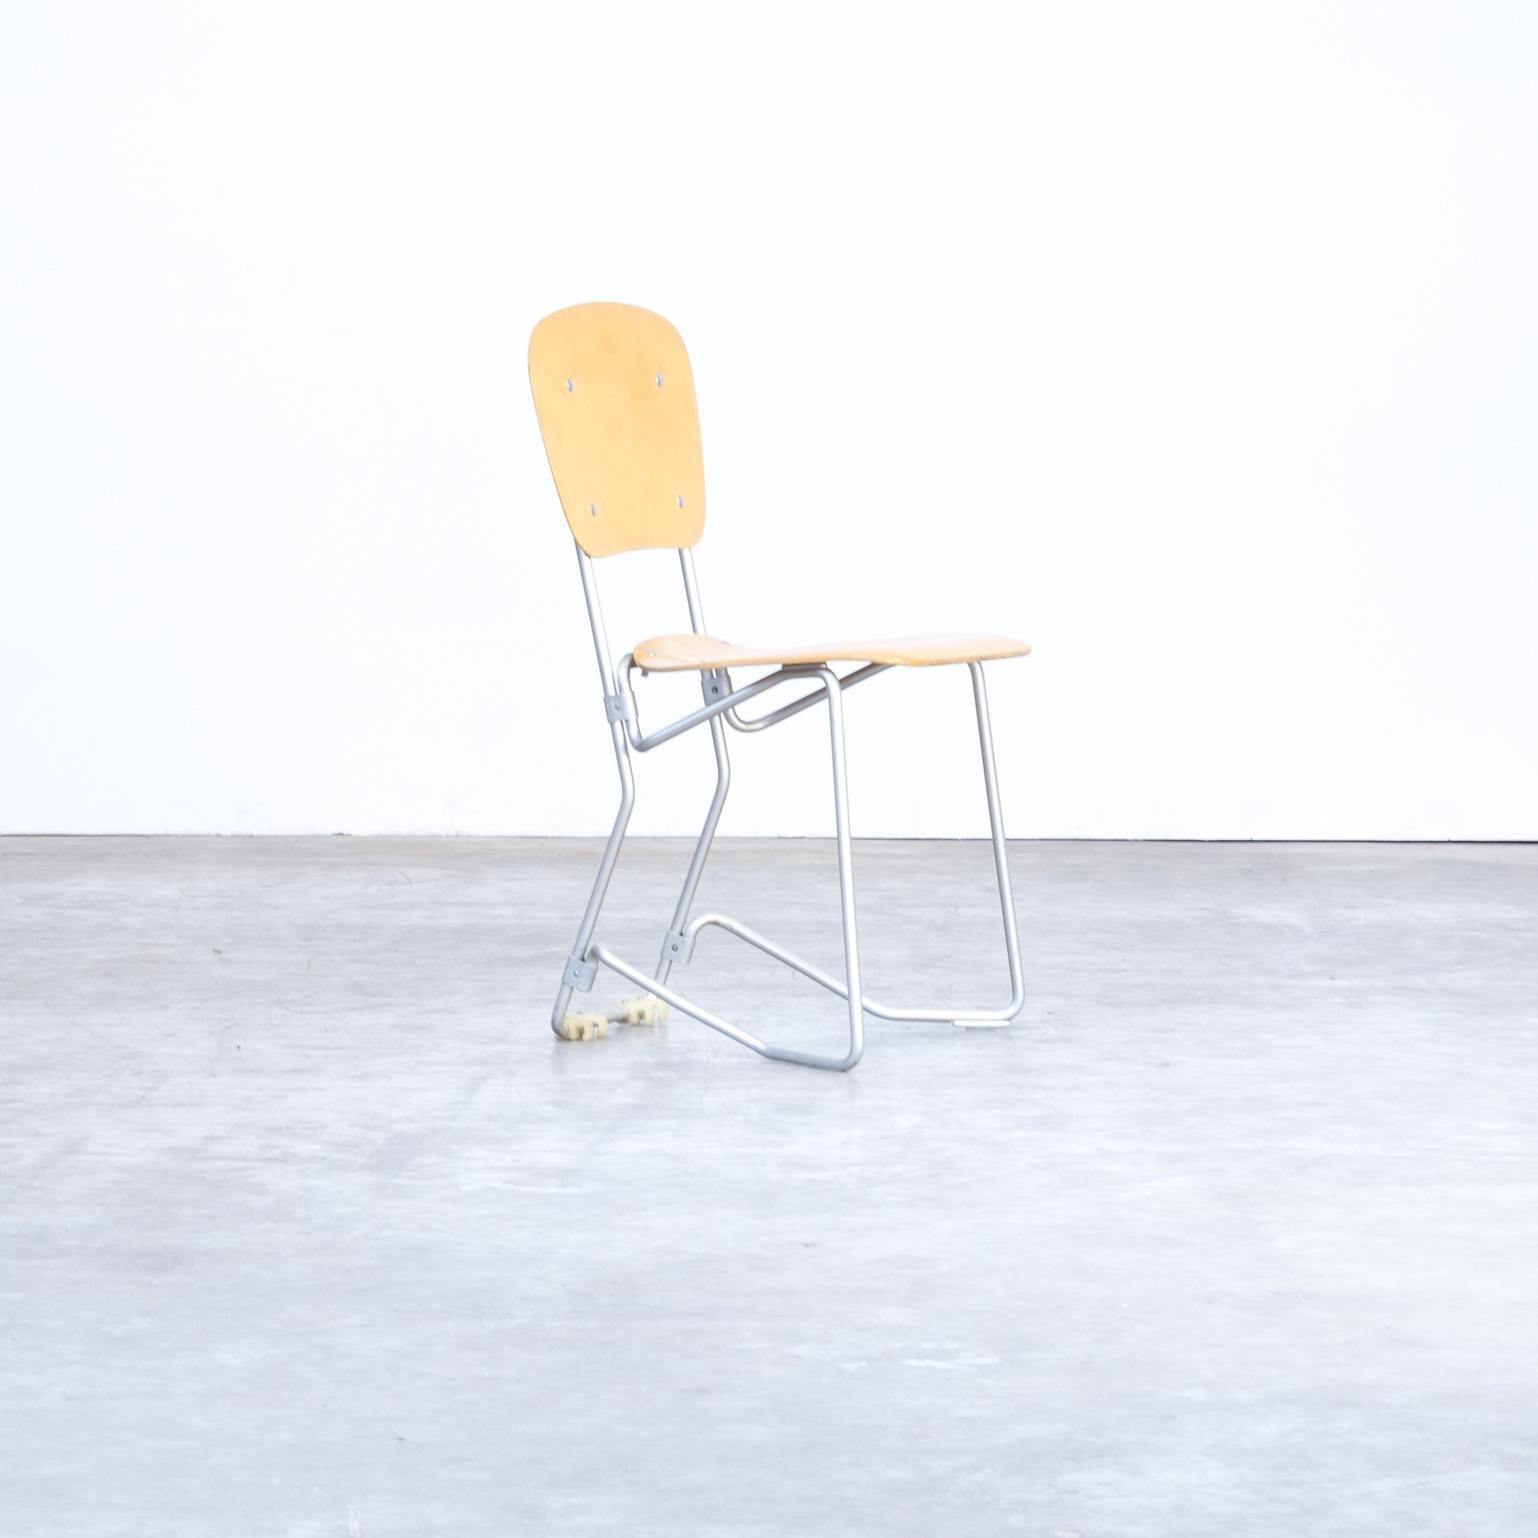 1950s Armin Wirth ‘aluflex’ Folding Chair for Hans Zollinger Sohre Set of 20 For Sale 6